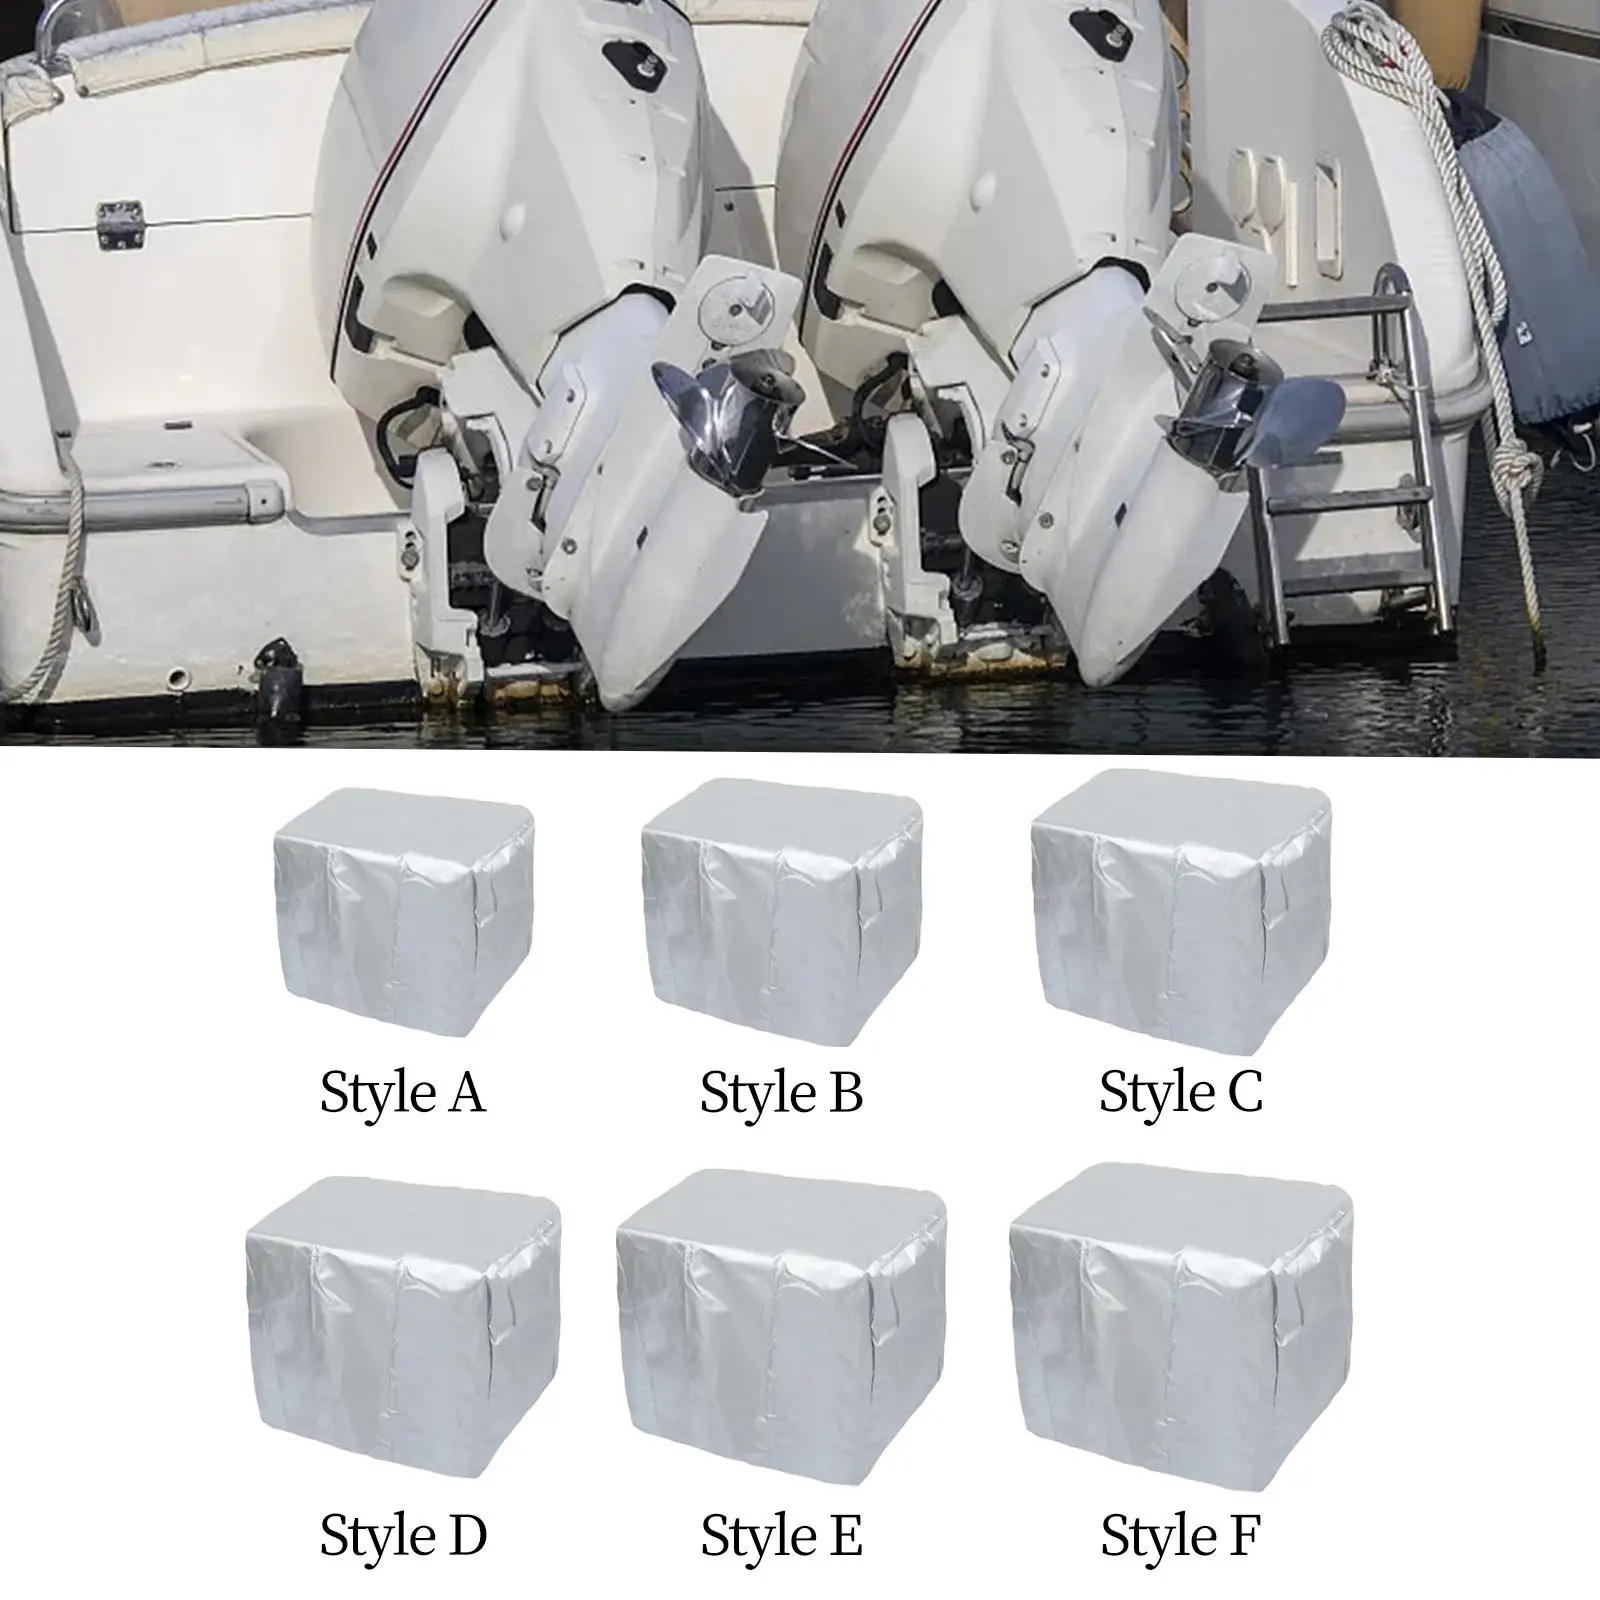 Boat Motor Covers Argent Yacht Waterproof Anti Wind Boat Engine Hood Covers